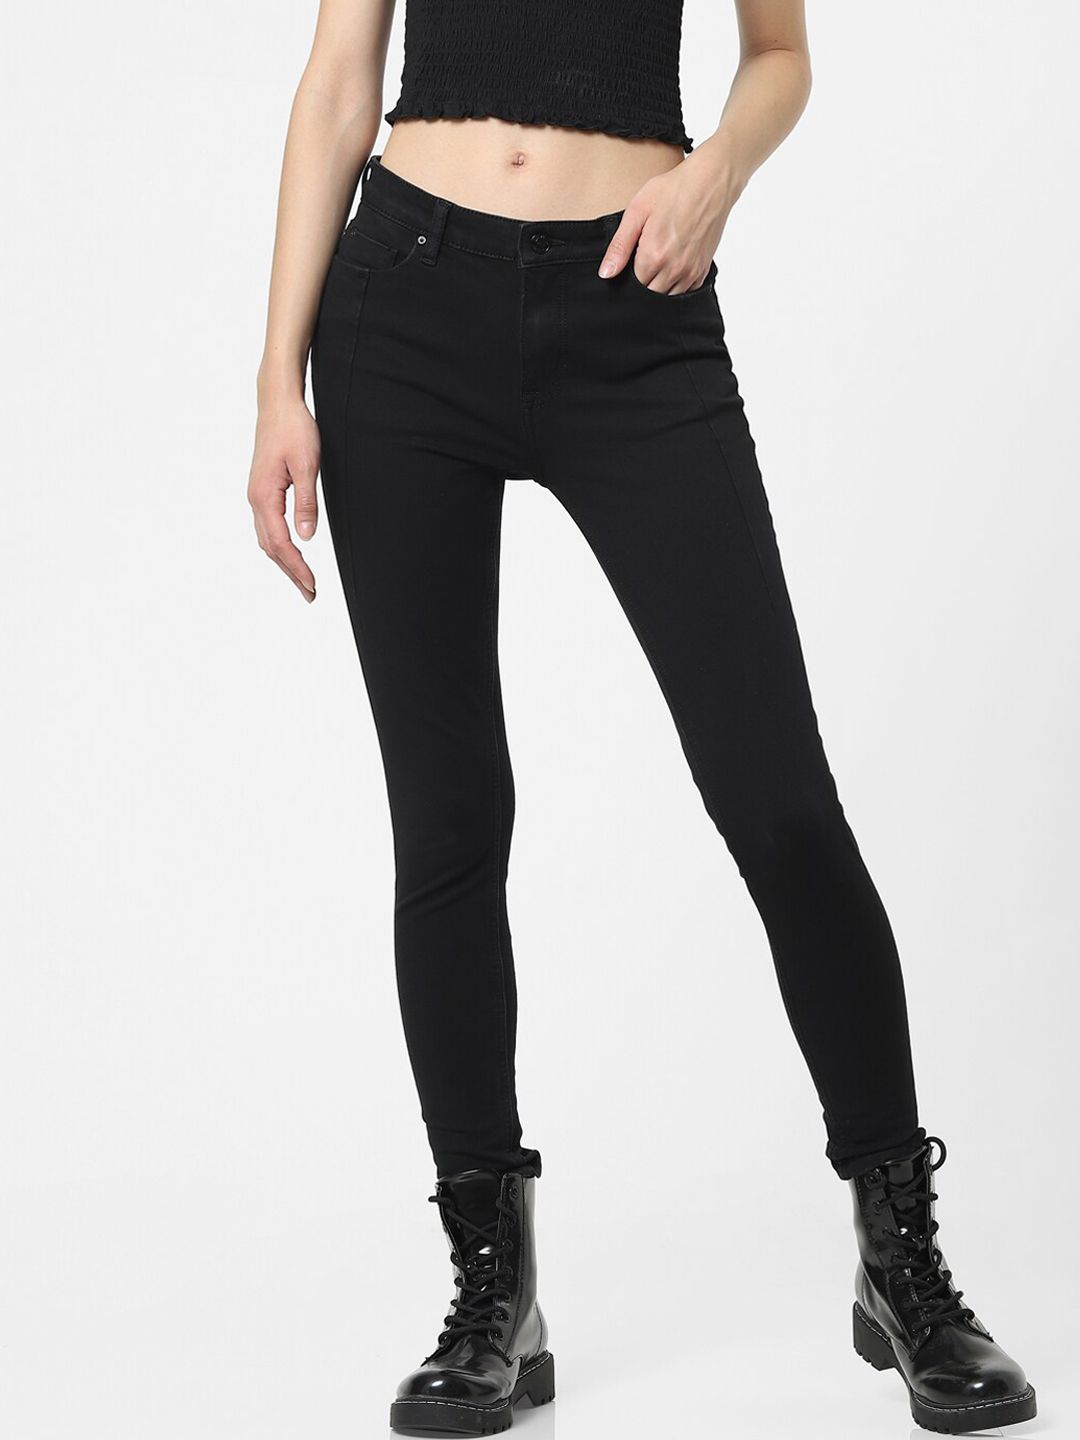 ONLY Women Black Skinny Fit Jeans Price in India